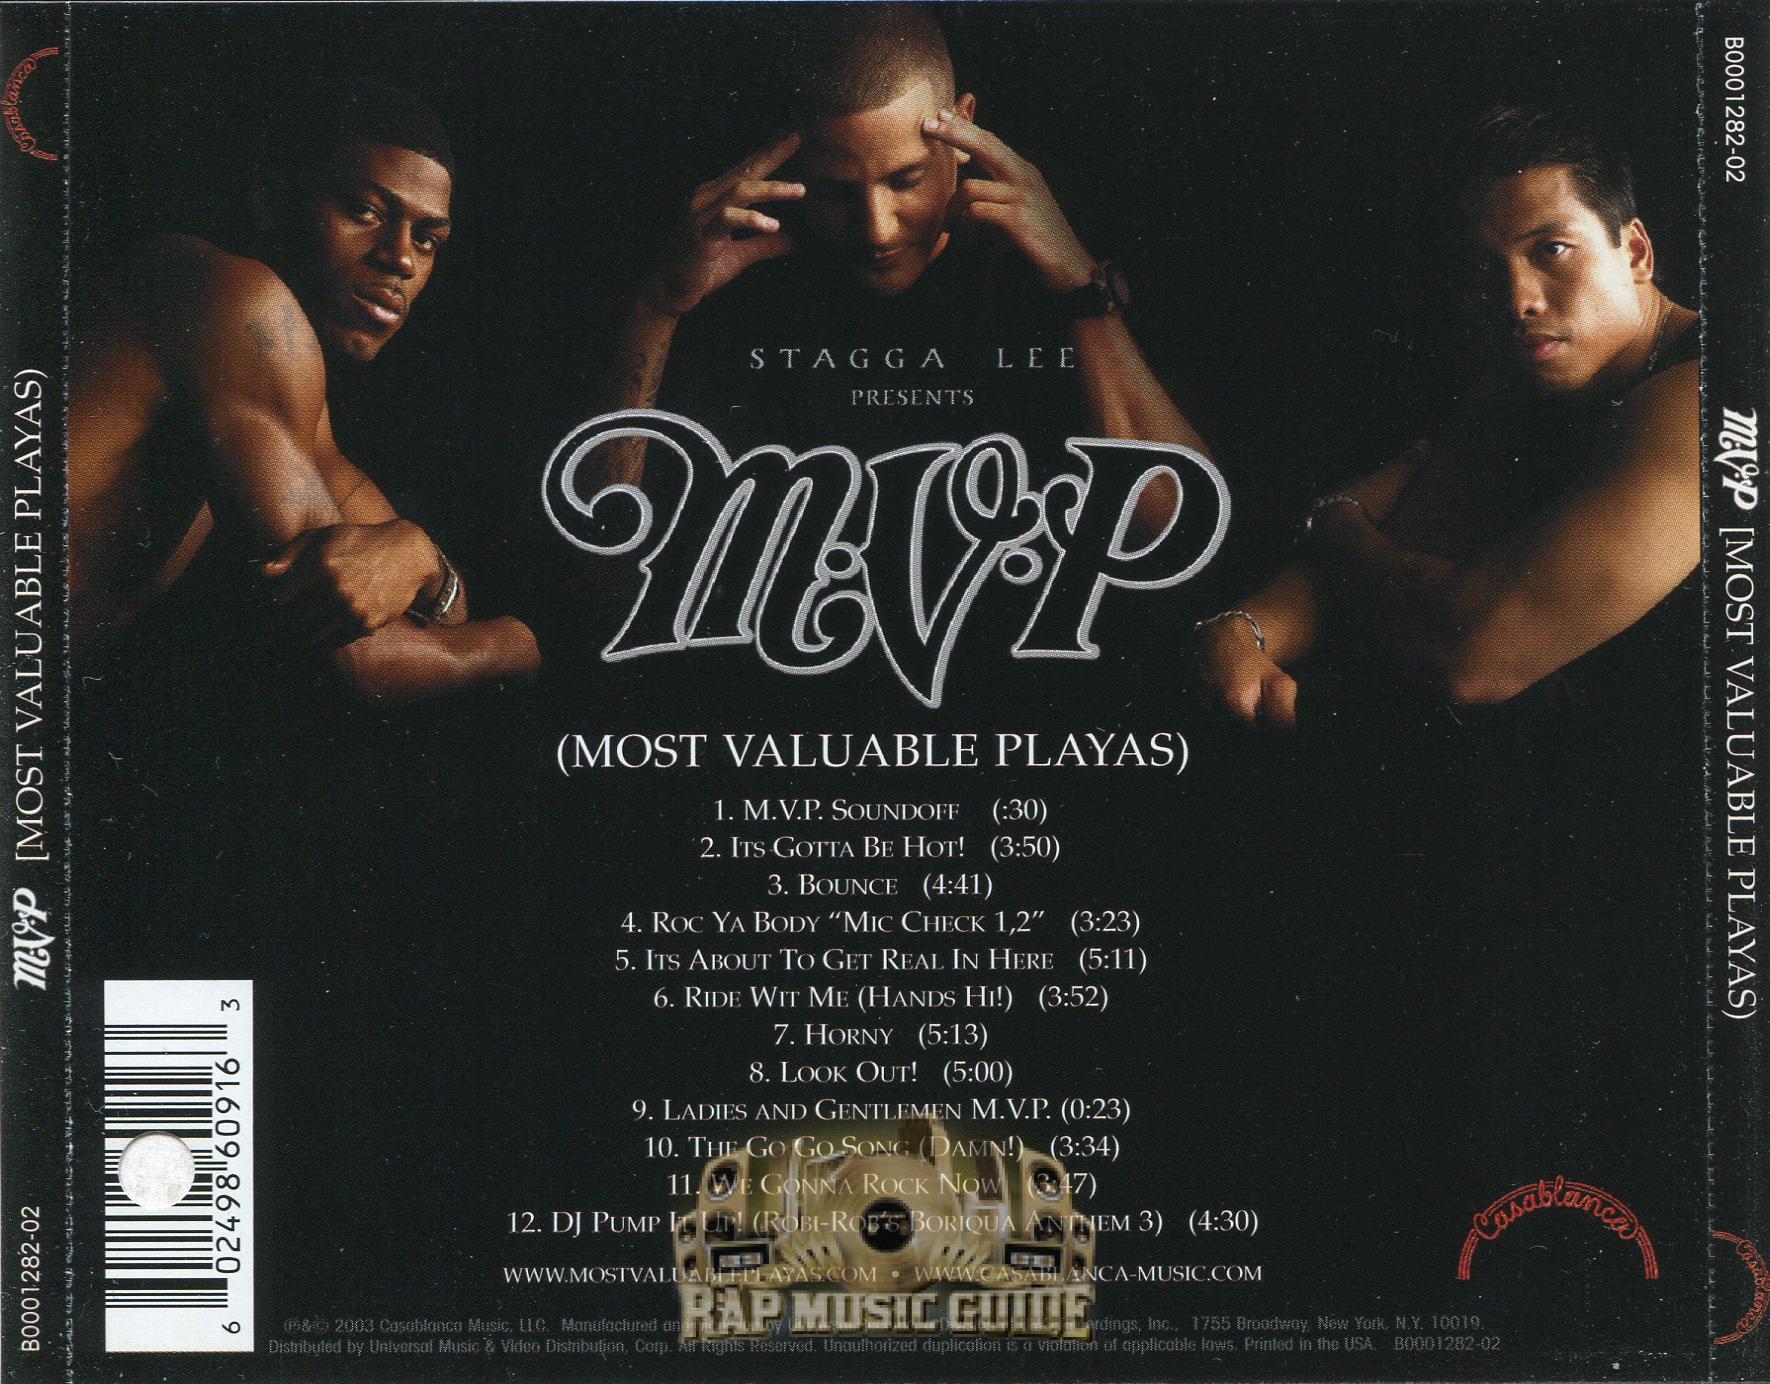 Stagga Lee Presents . (Most Valuable Playas): CD | Rap Music Guide